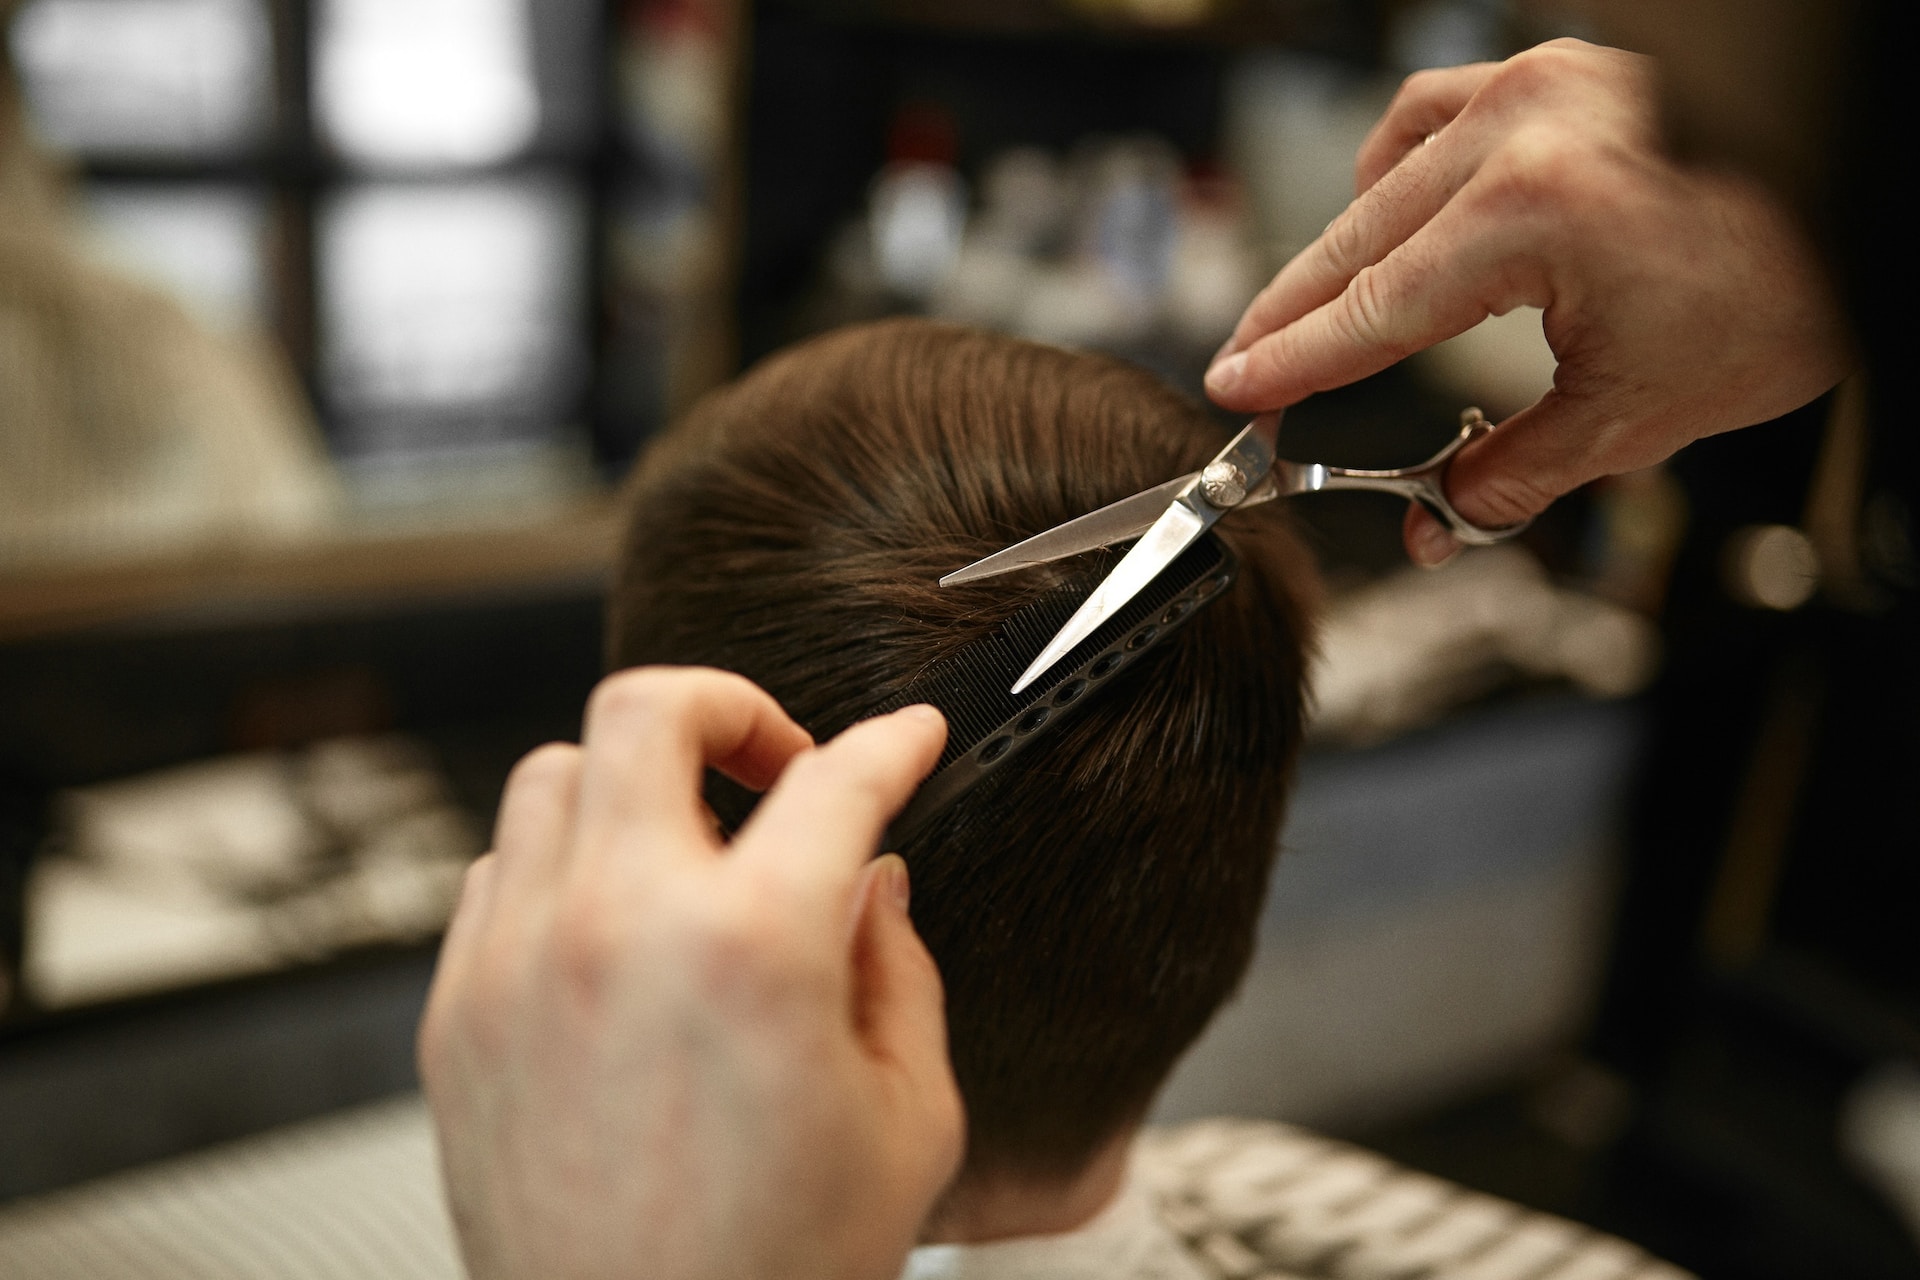 How to Sharpen and Care for Barbering Scissors Full Guide